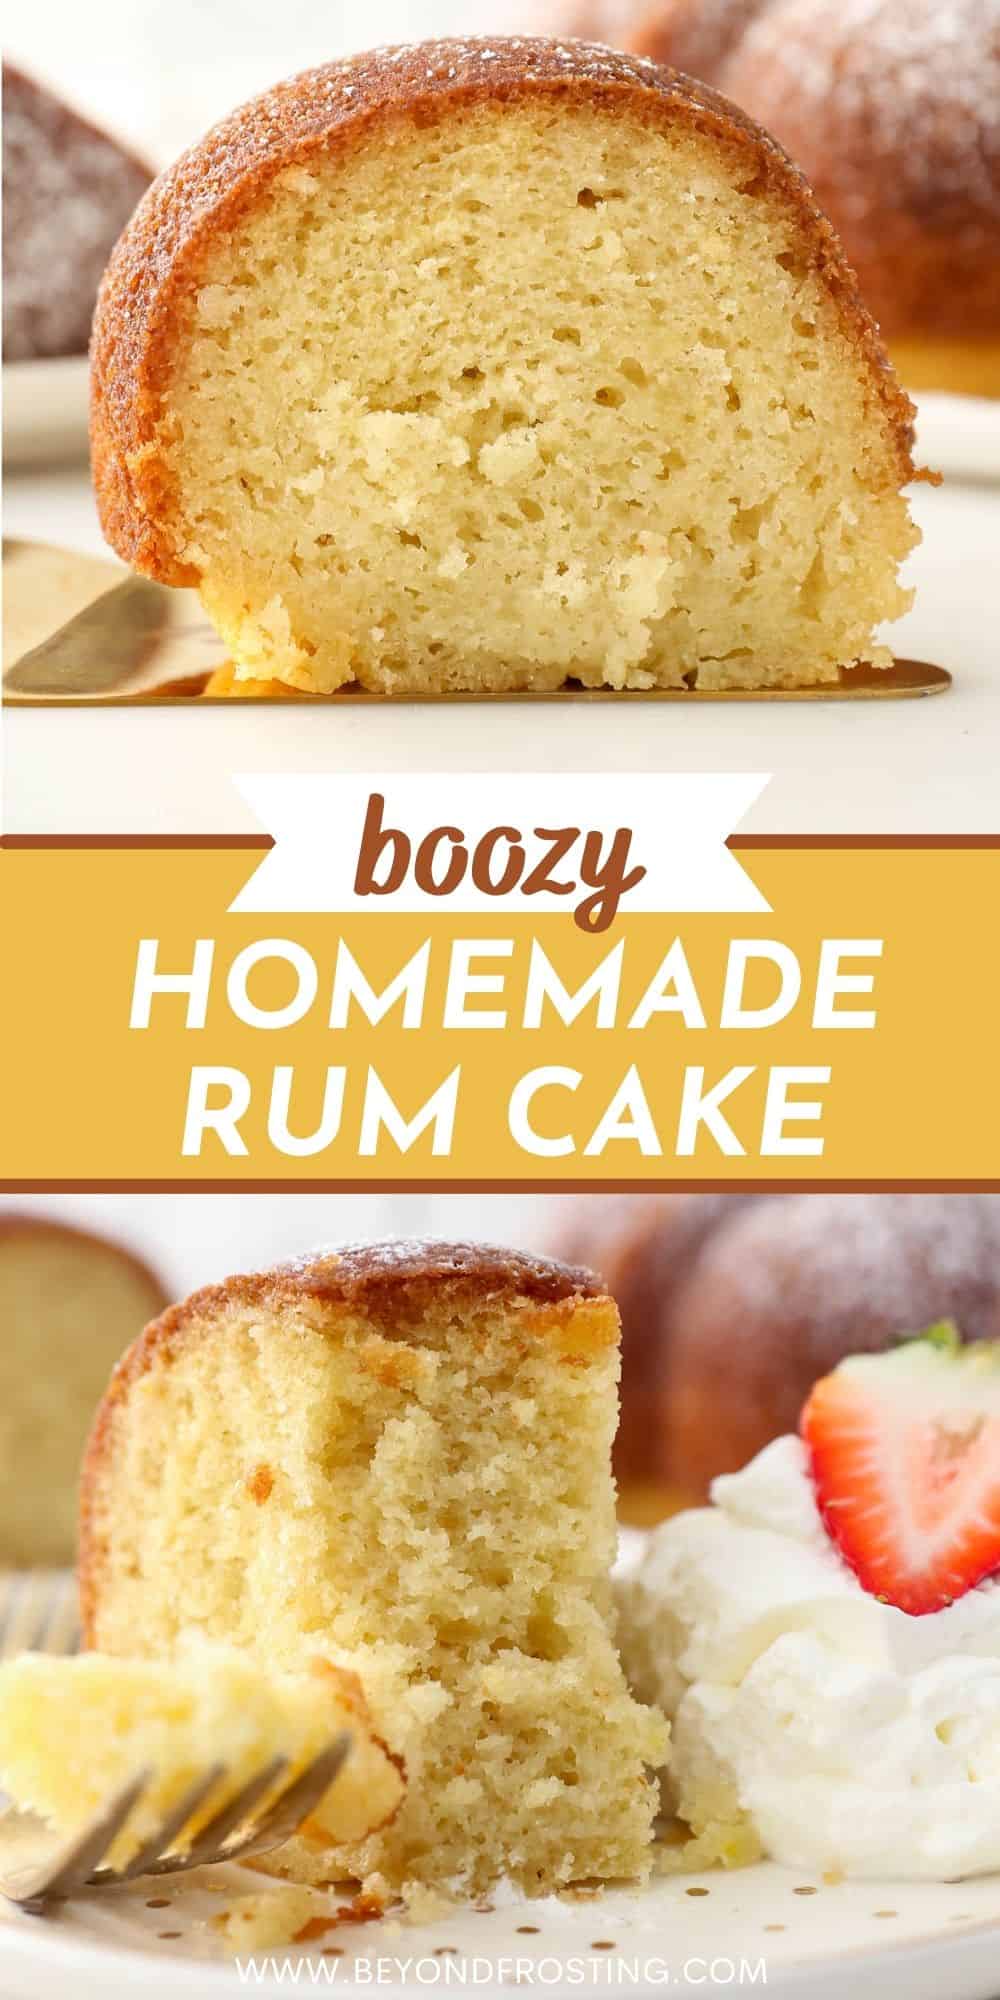 The Best Homemade Rum Cake | Beyond Frosting